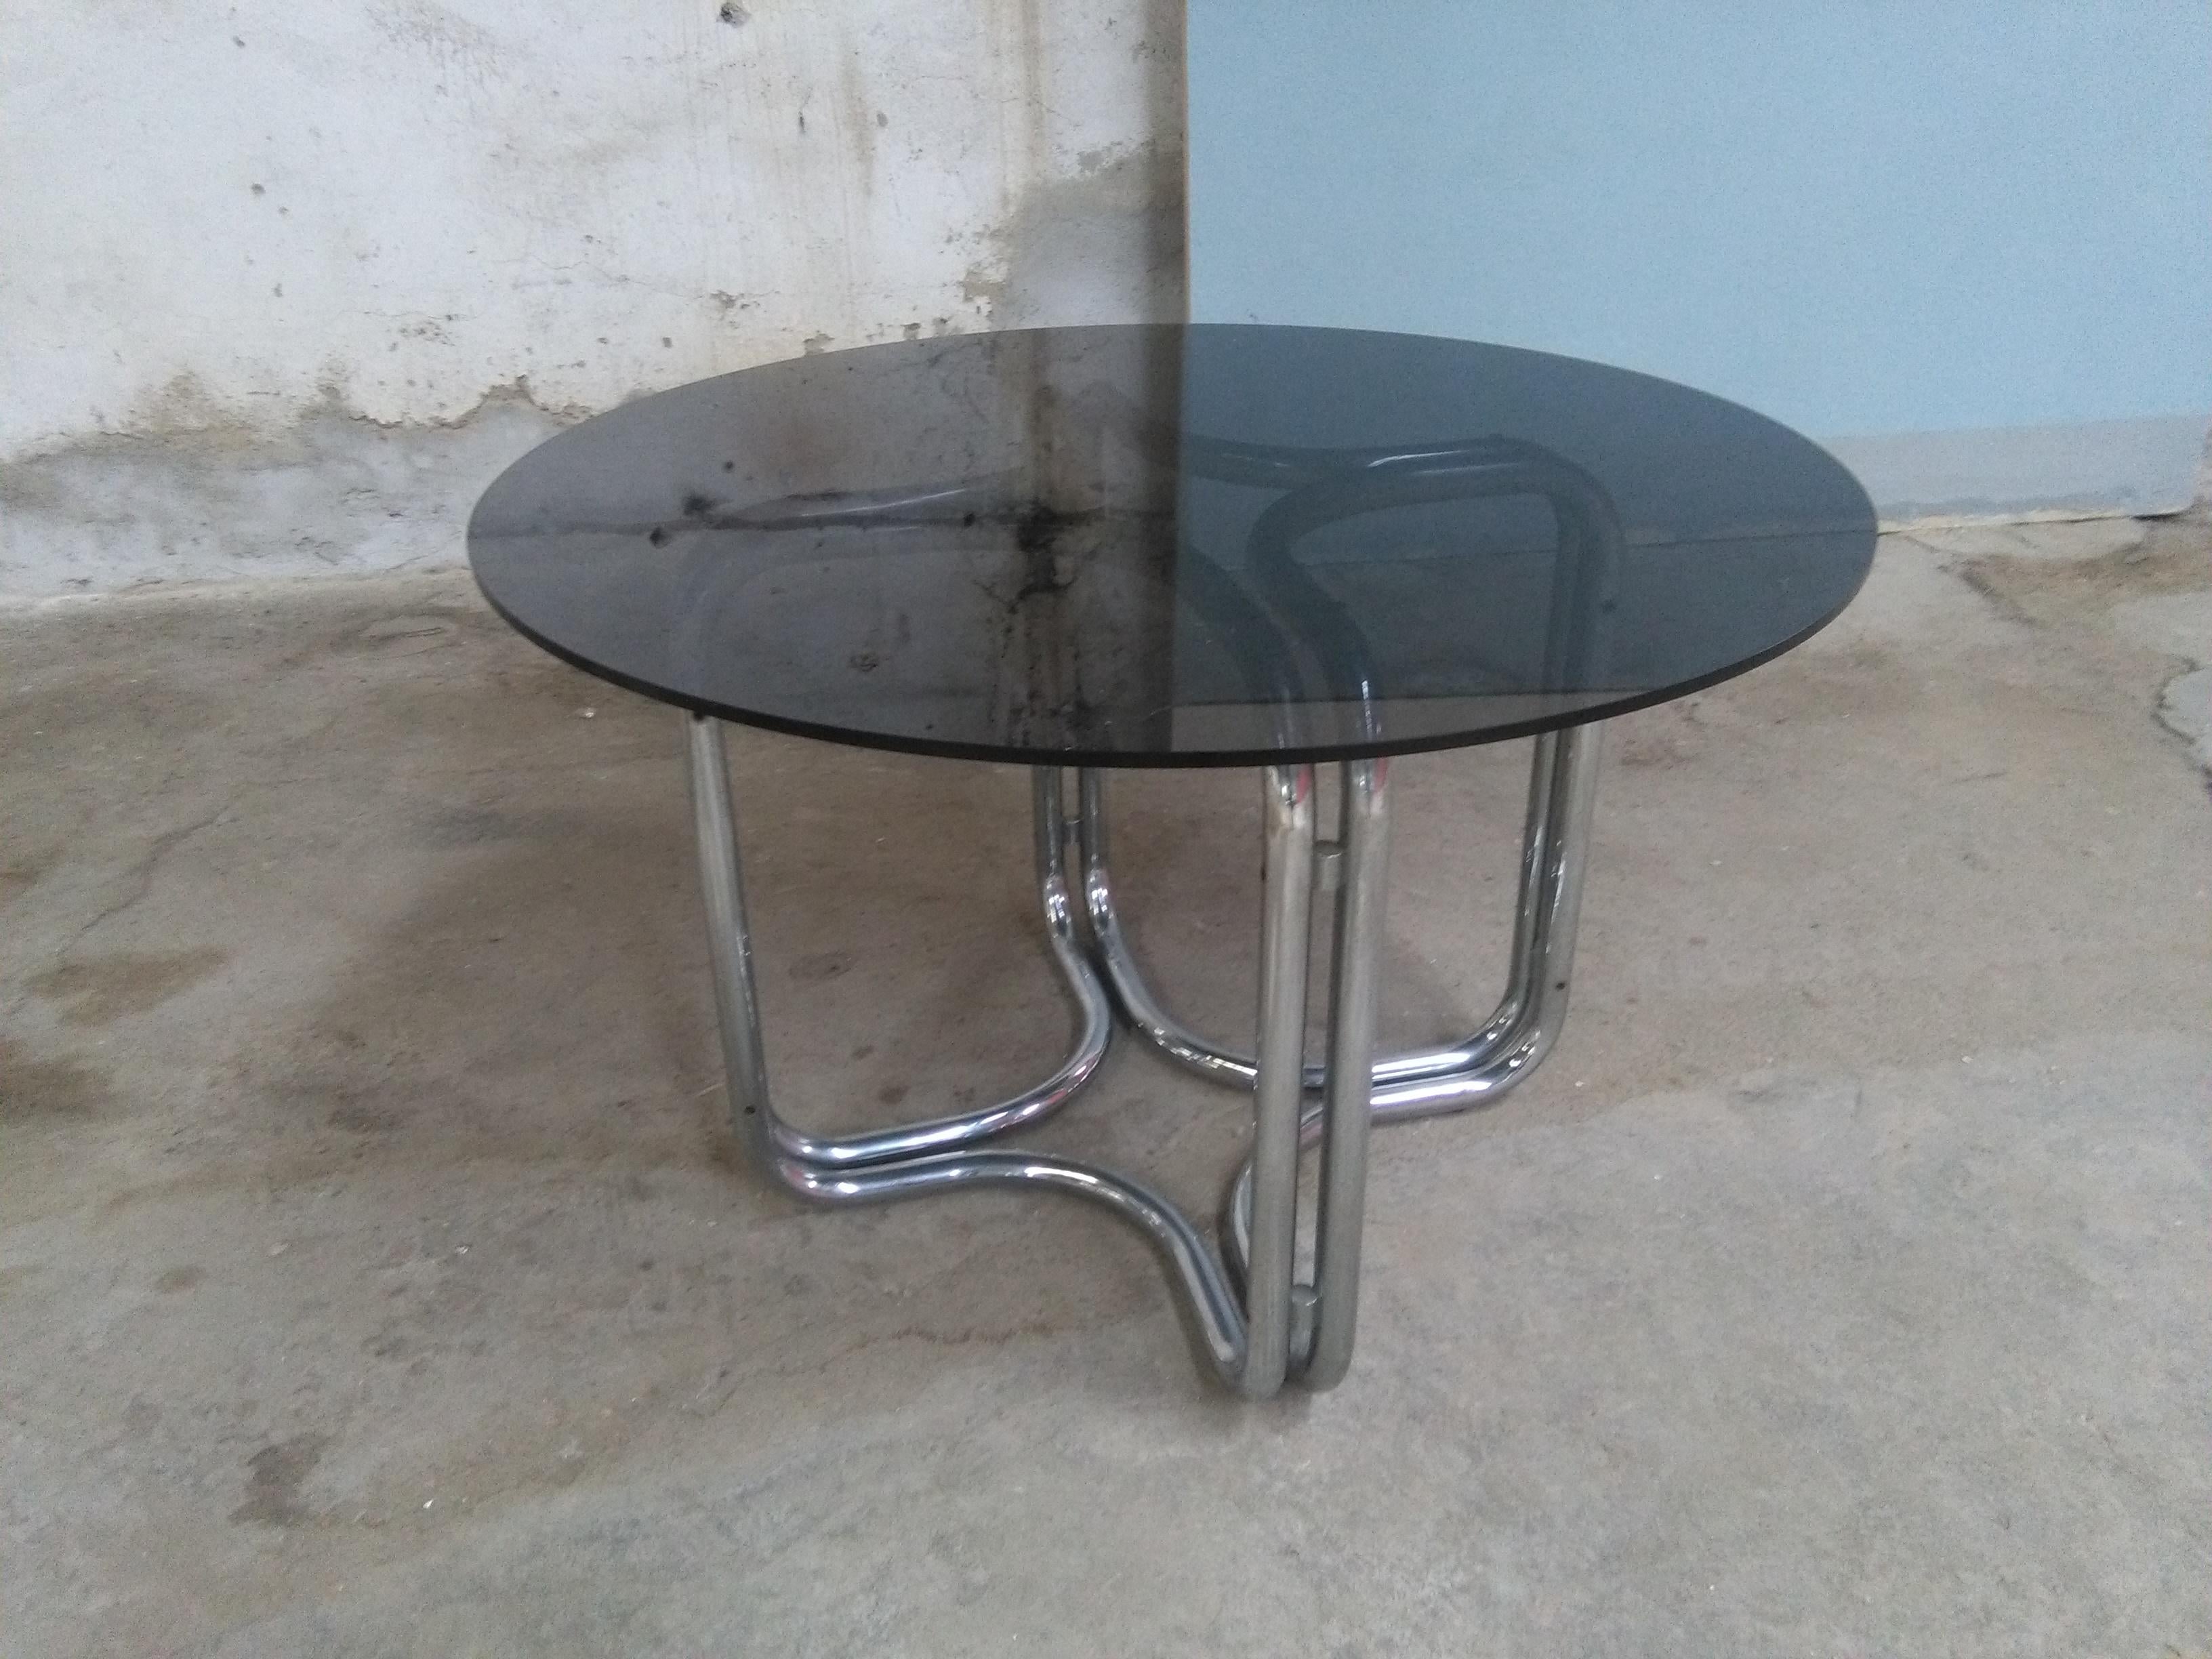 Mid-Century Modern Italian dining or centre table with chrome legs and smoked glass top by Giotto Stoppino, 1970s.